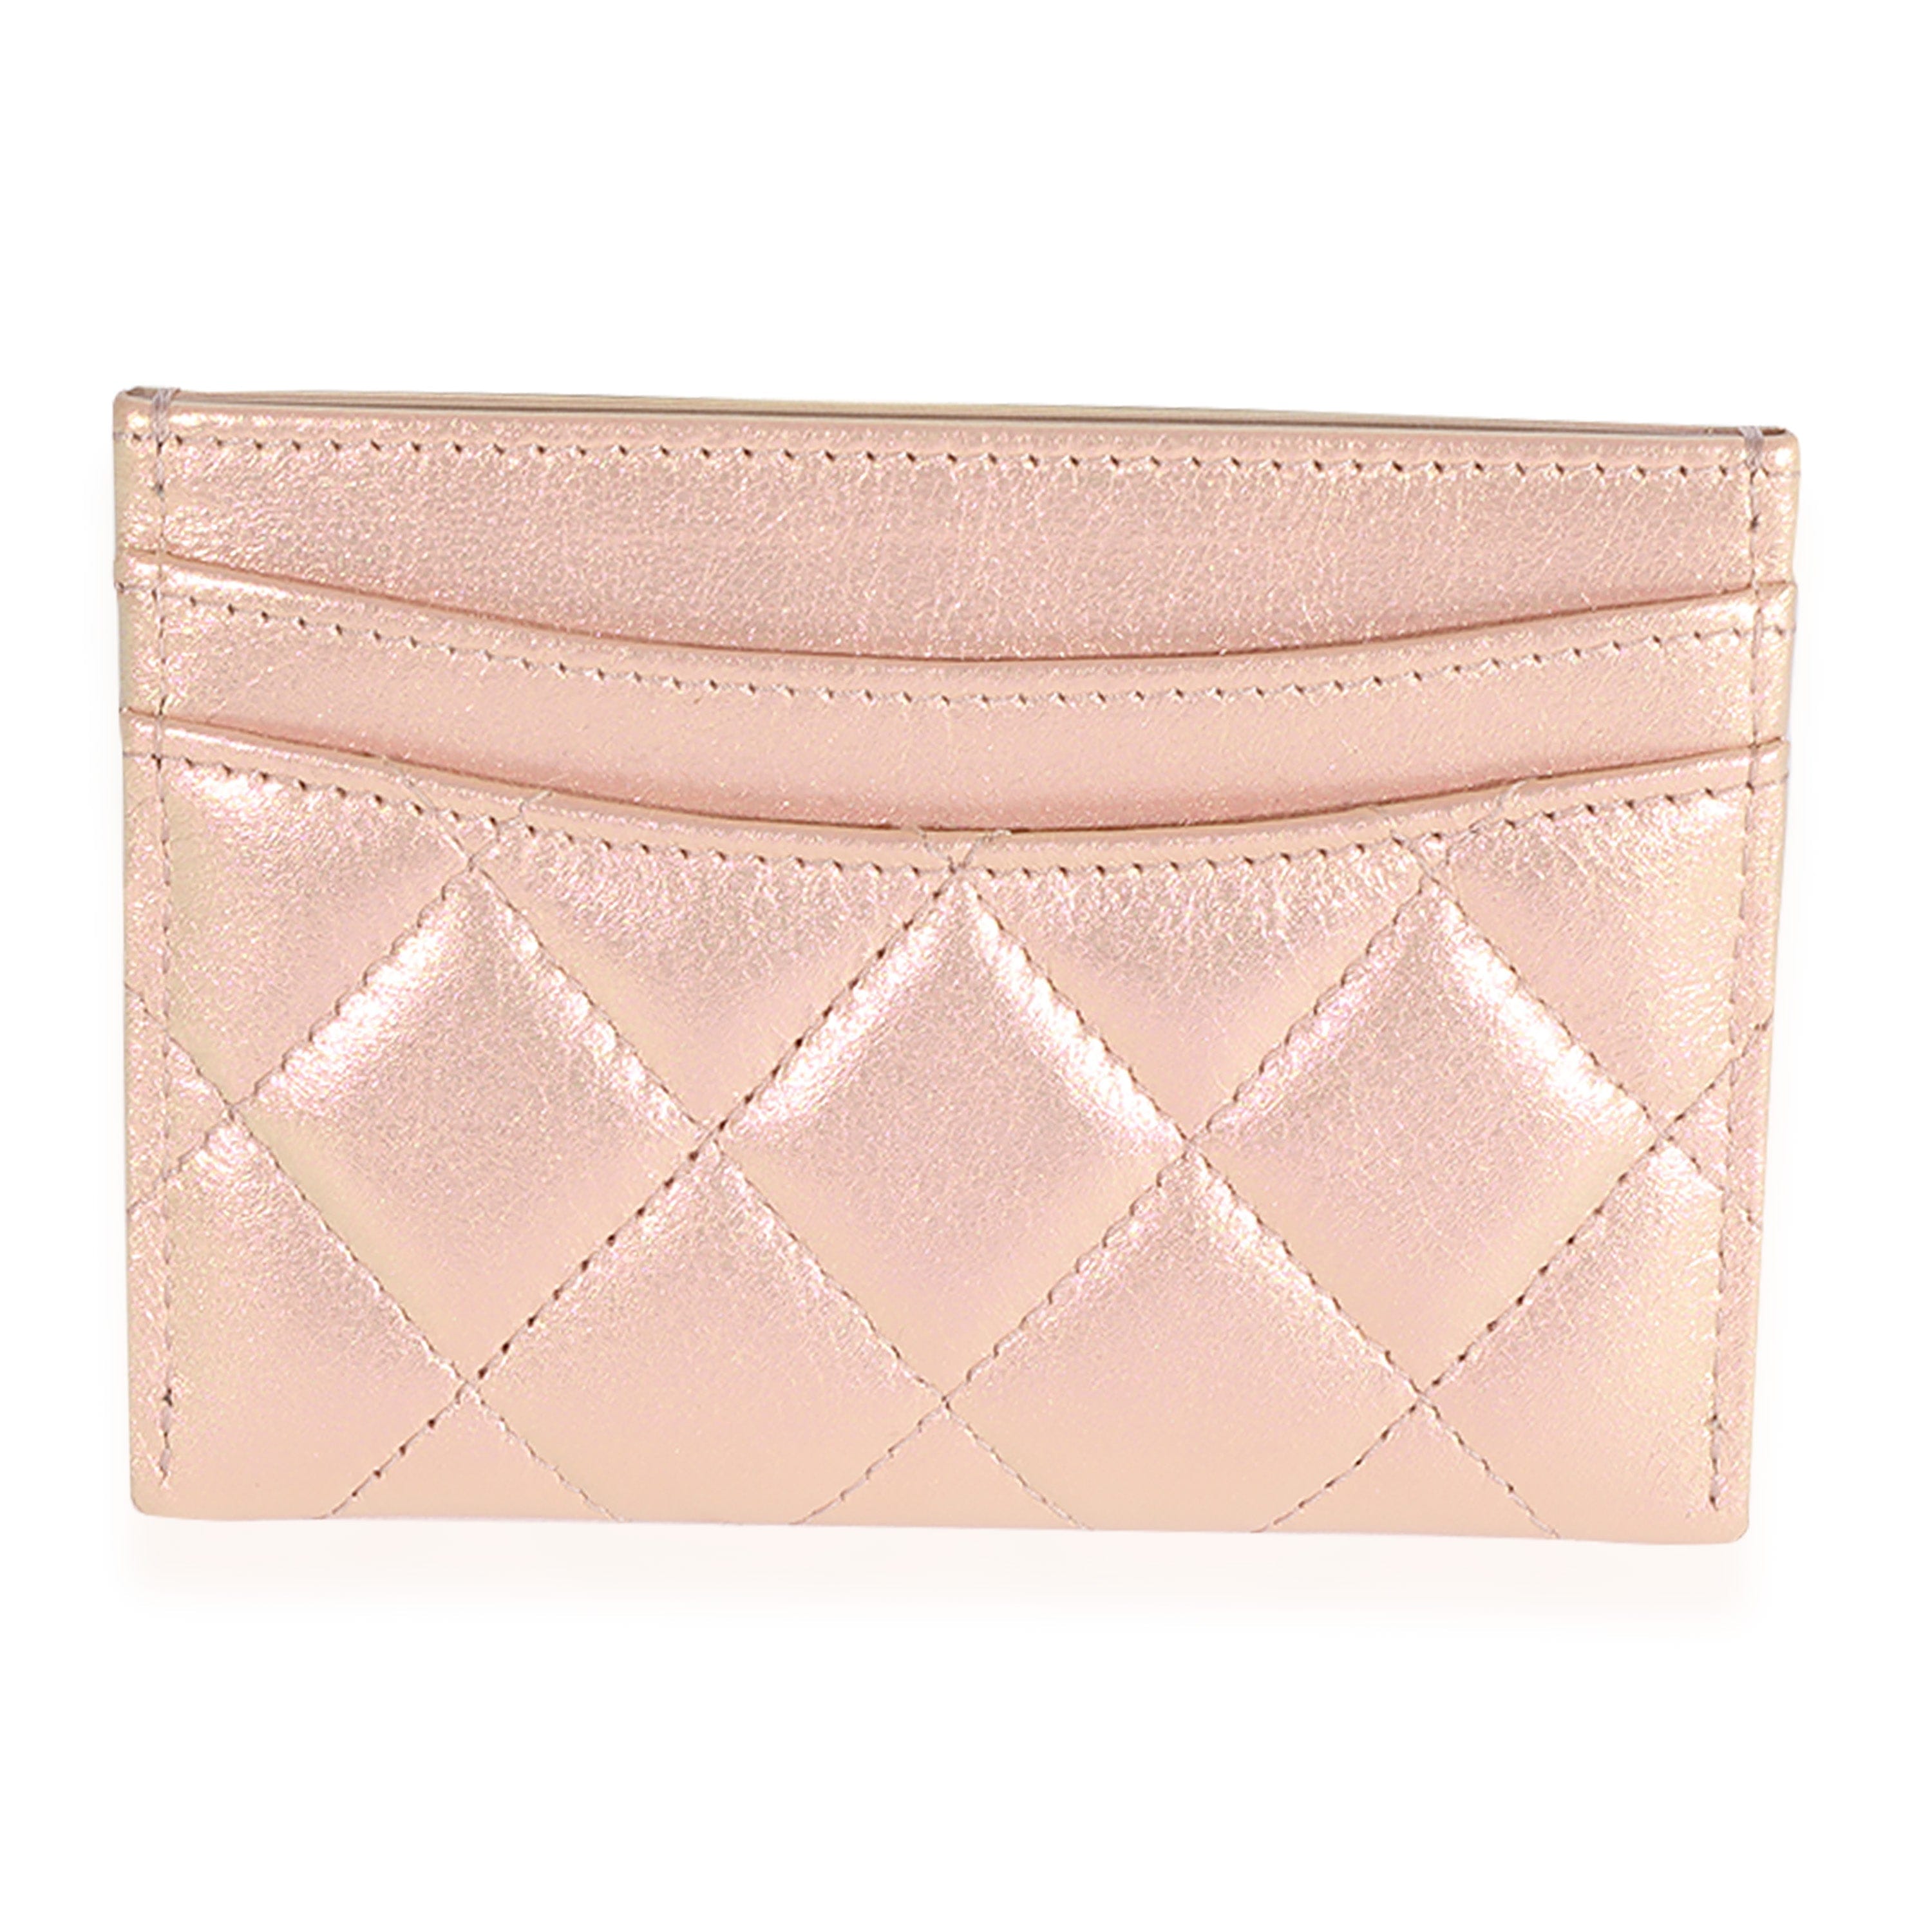 Chanel Chanel Iridescent Rose Quilted Lambskin Classic Card Holder